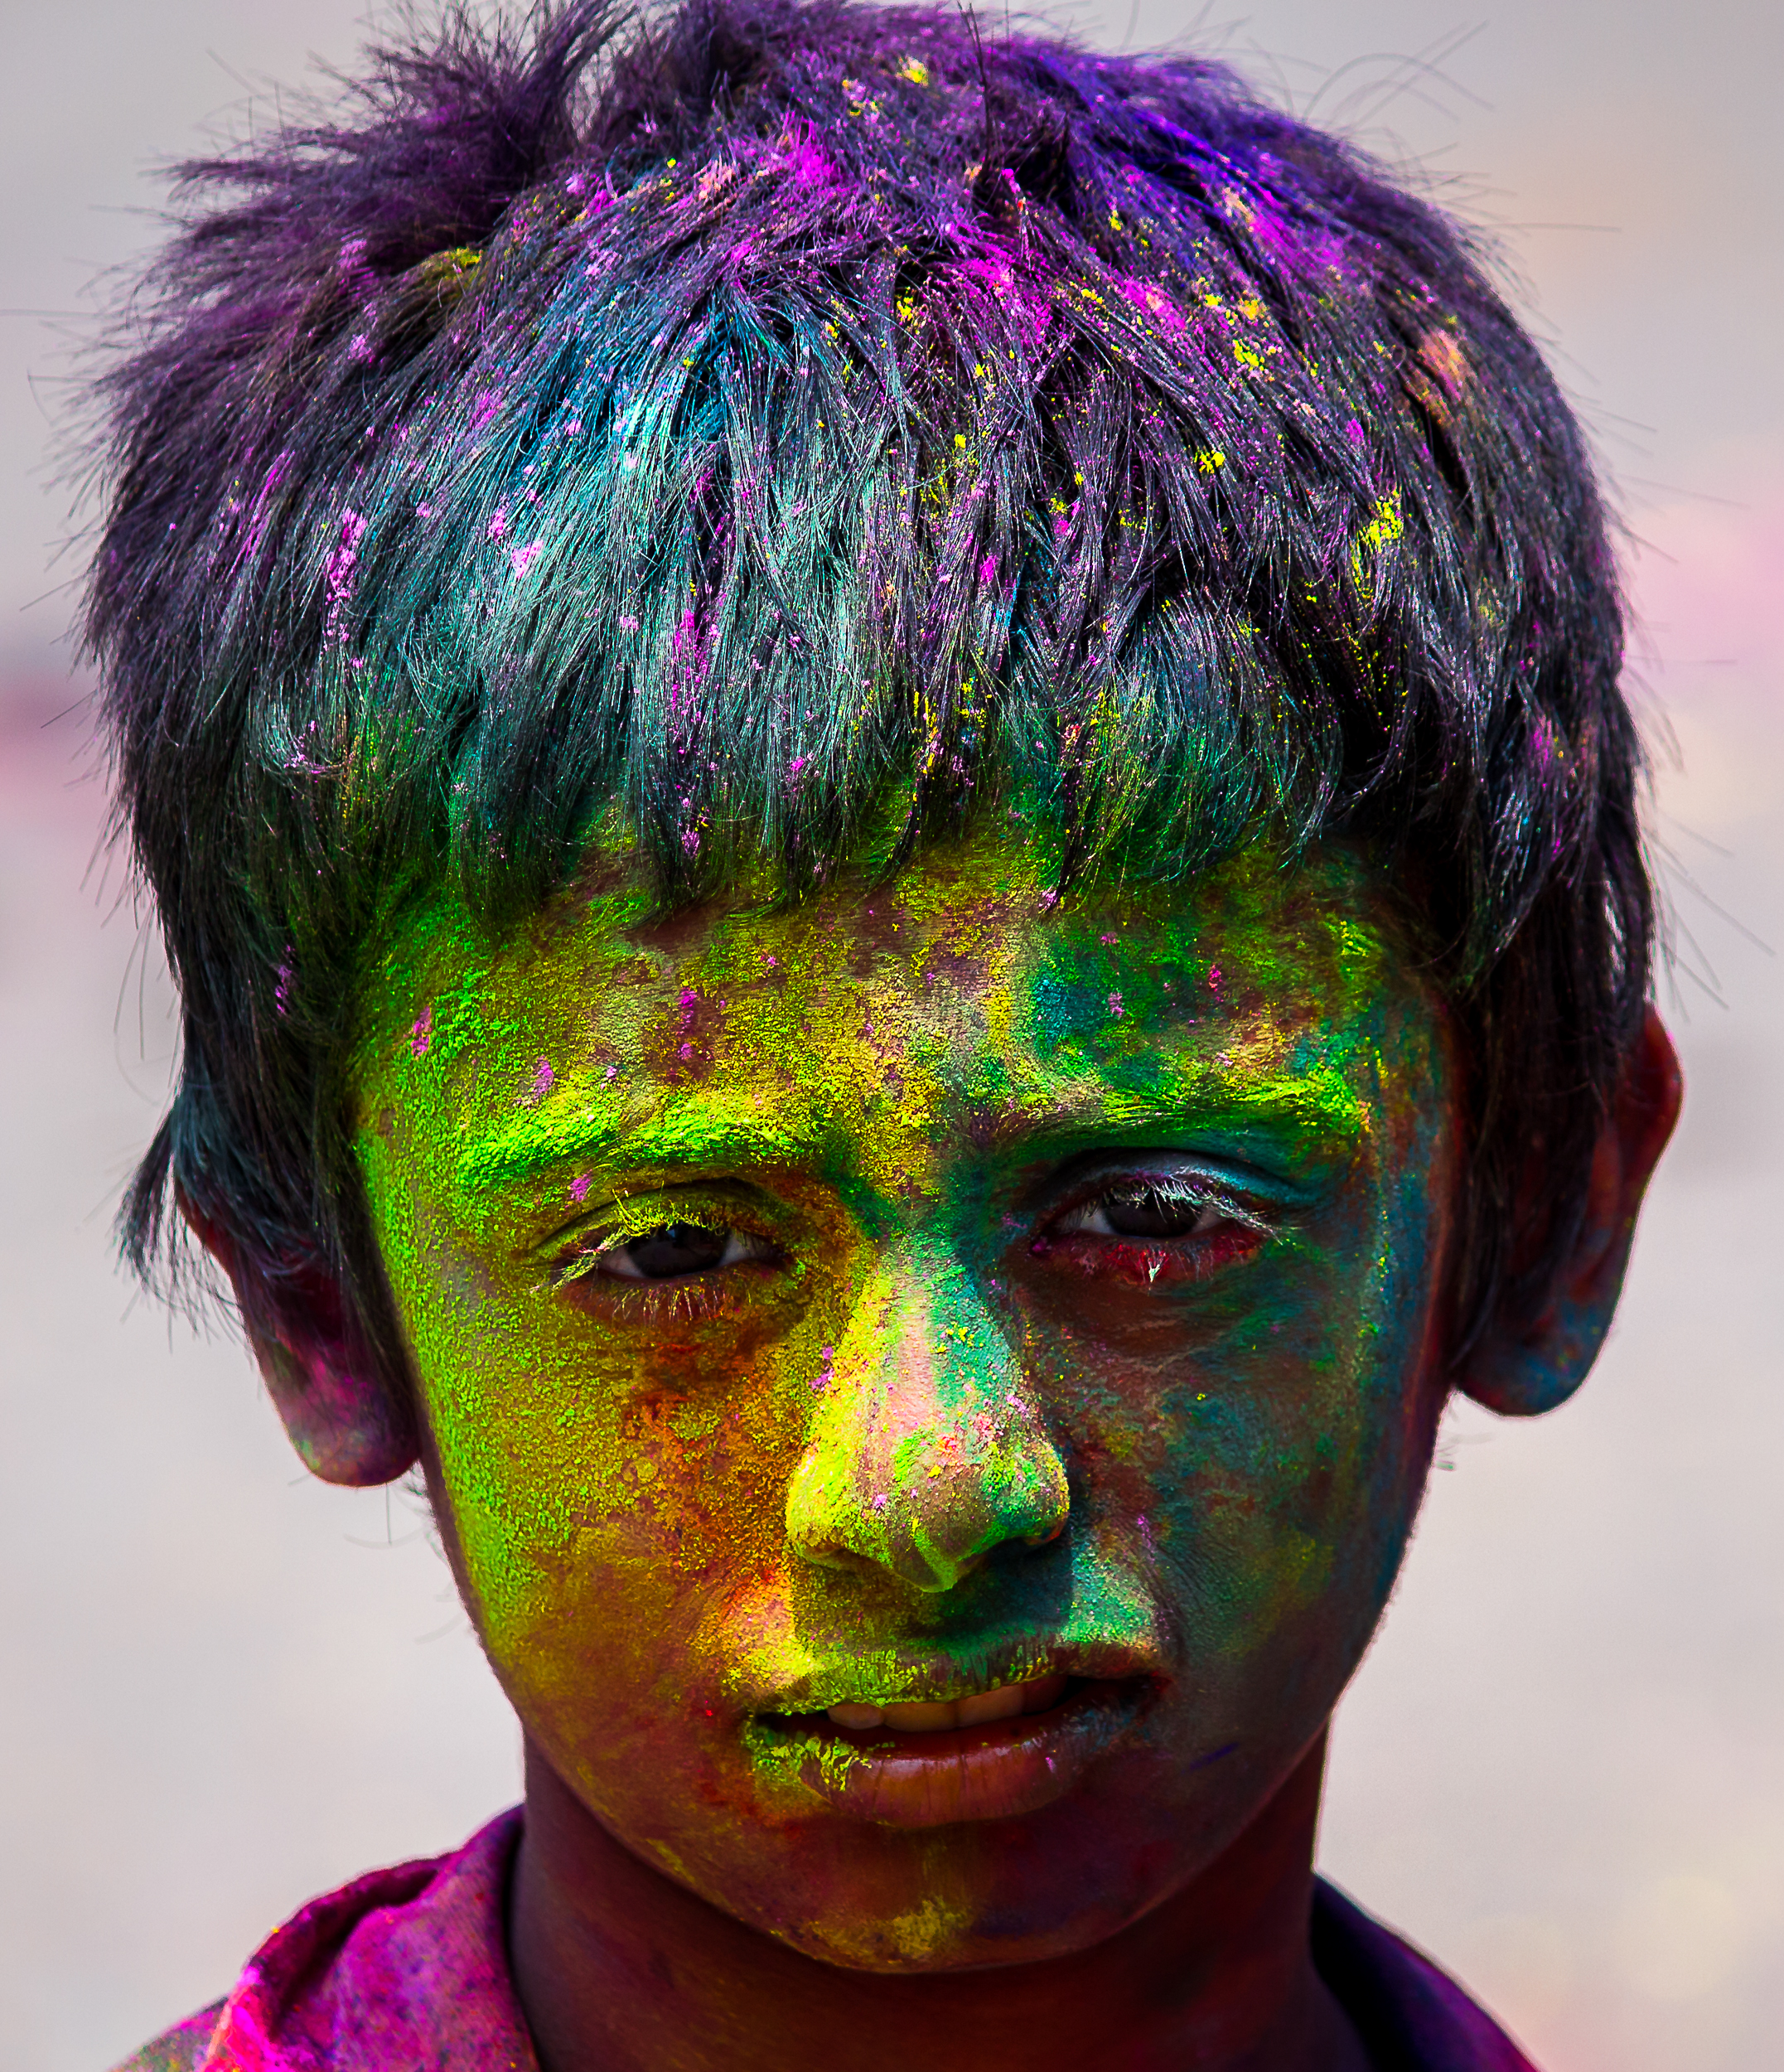 A child's face painted with Holi colors